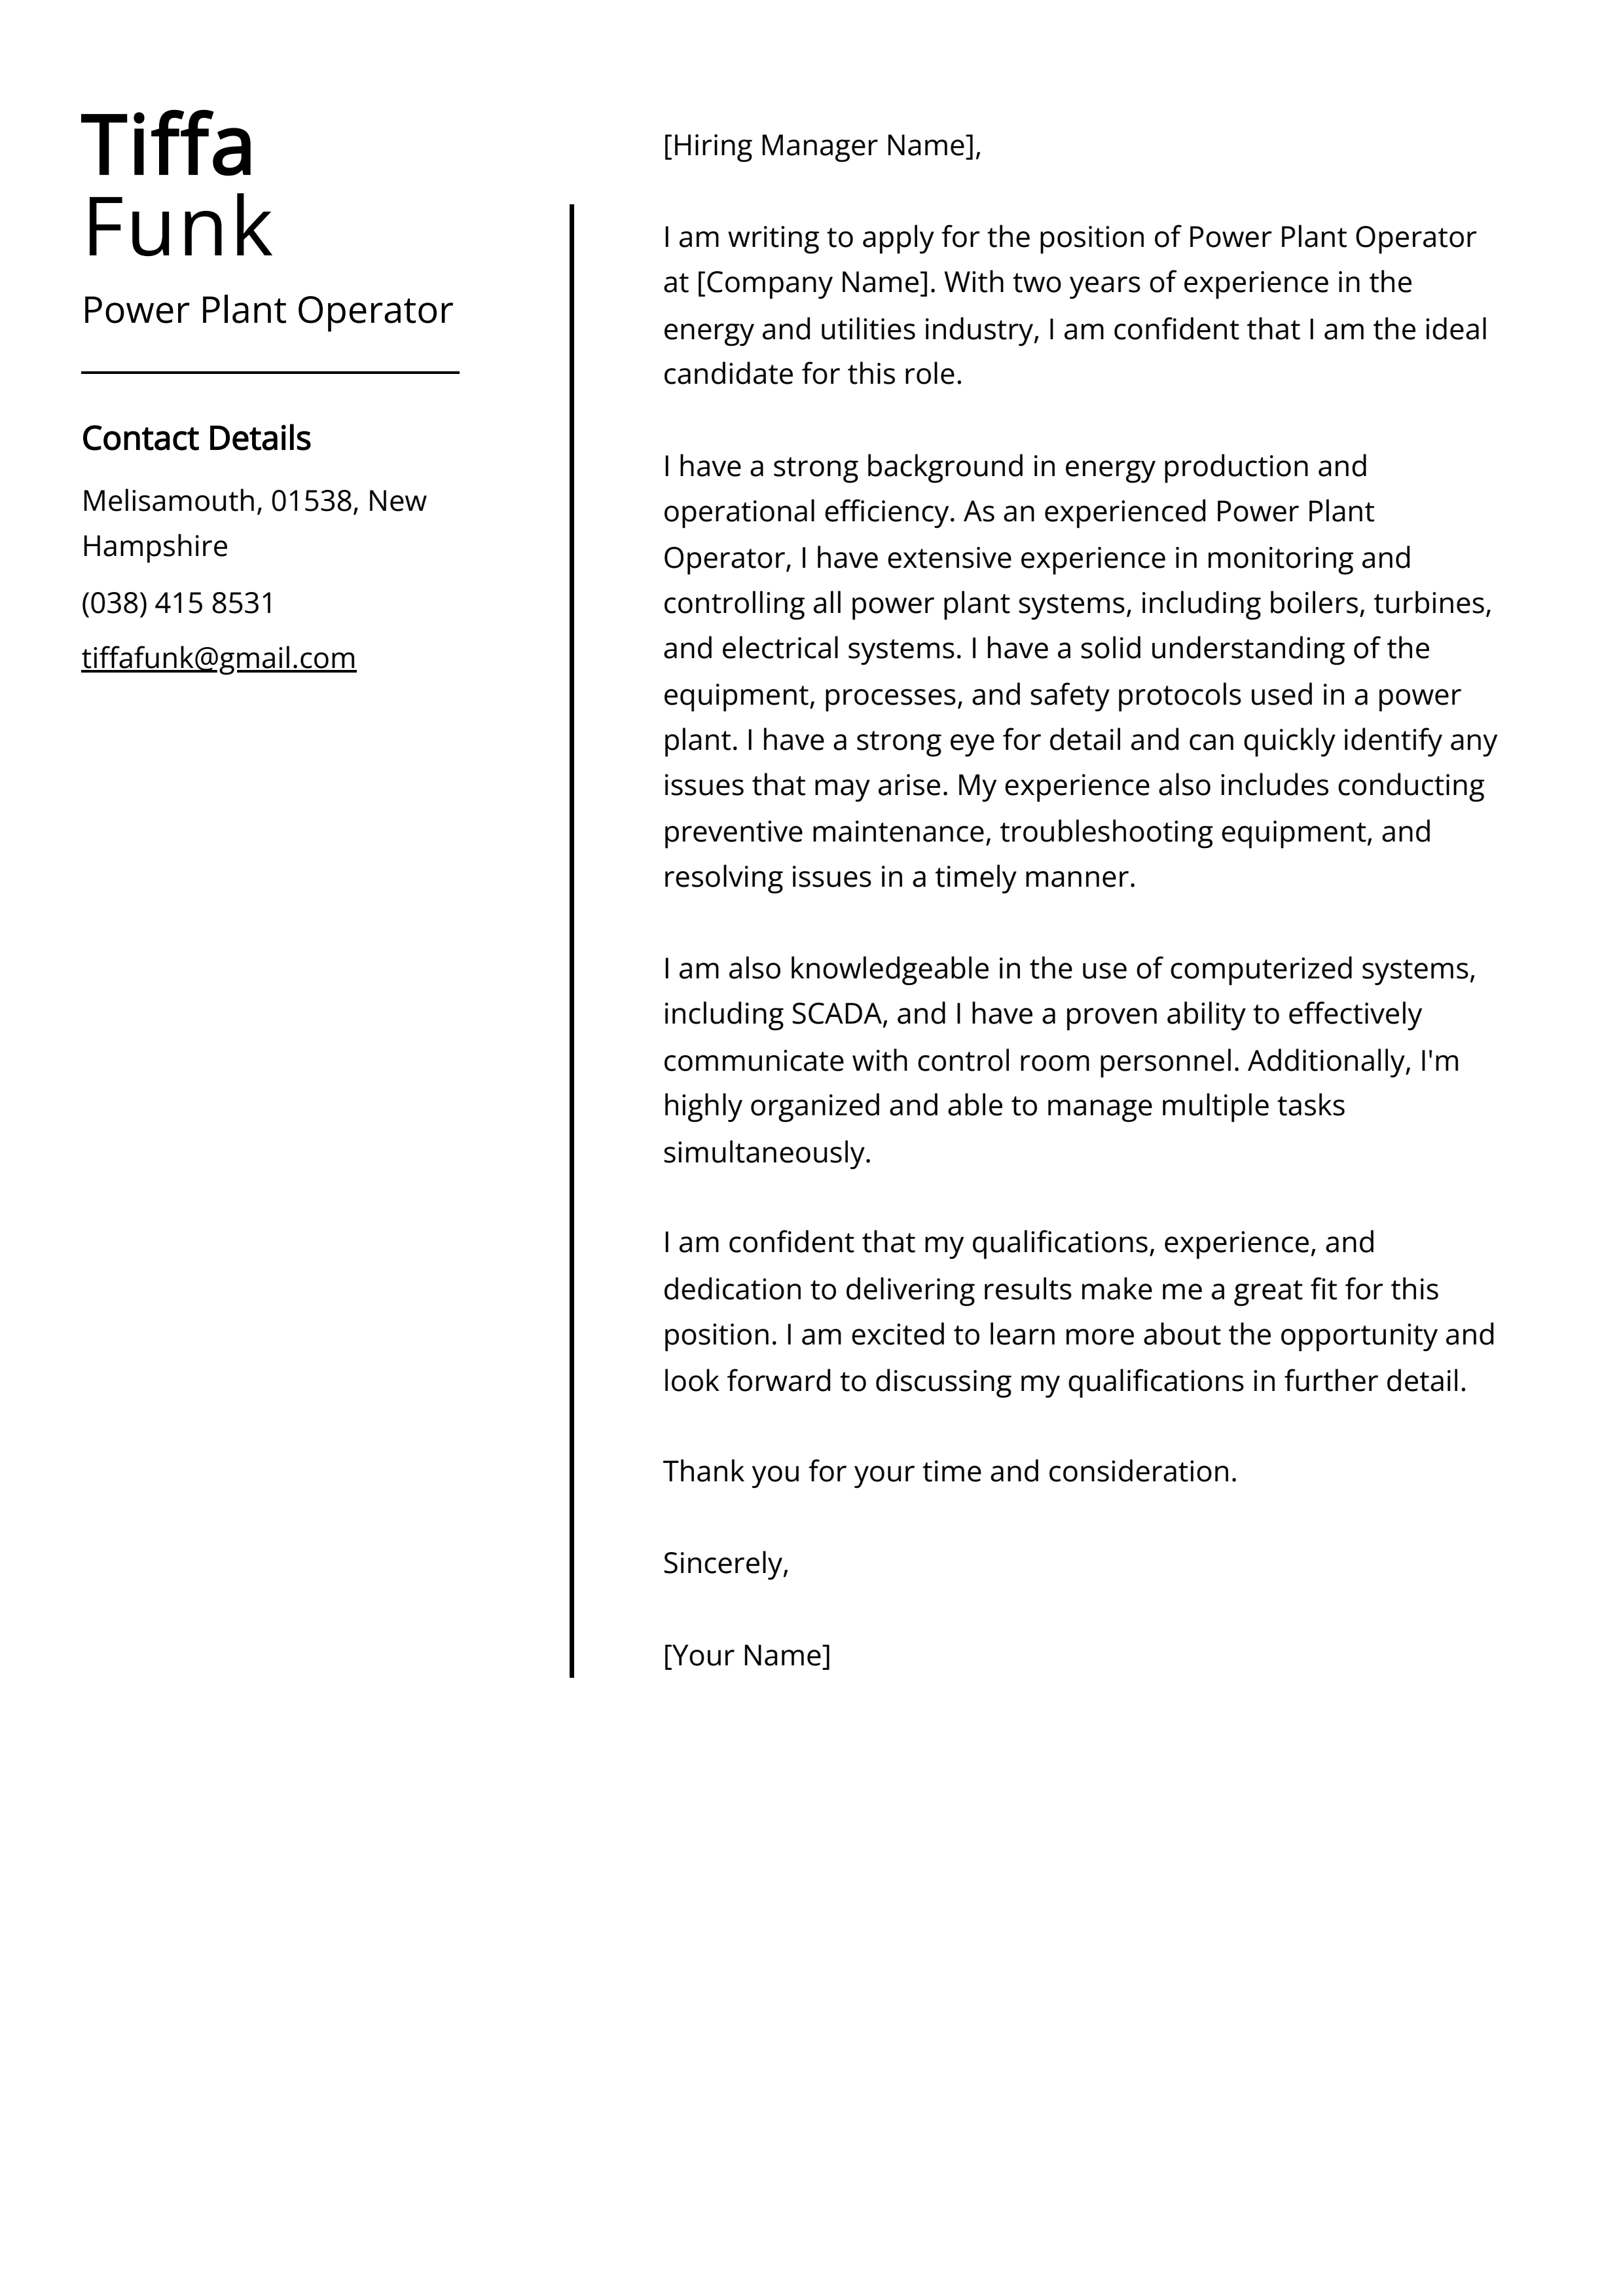 Power Plant Operator Cover Letter Example